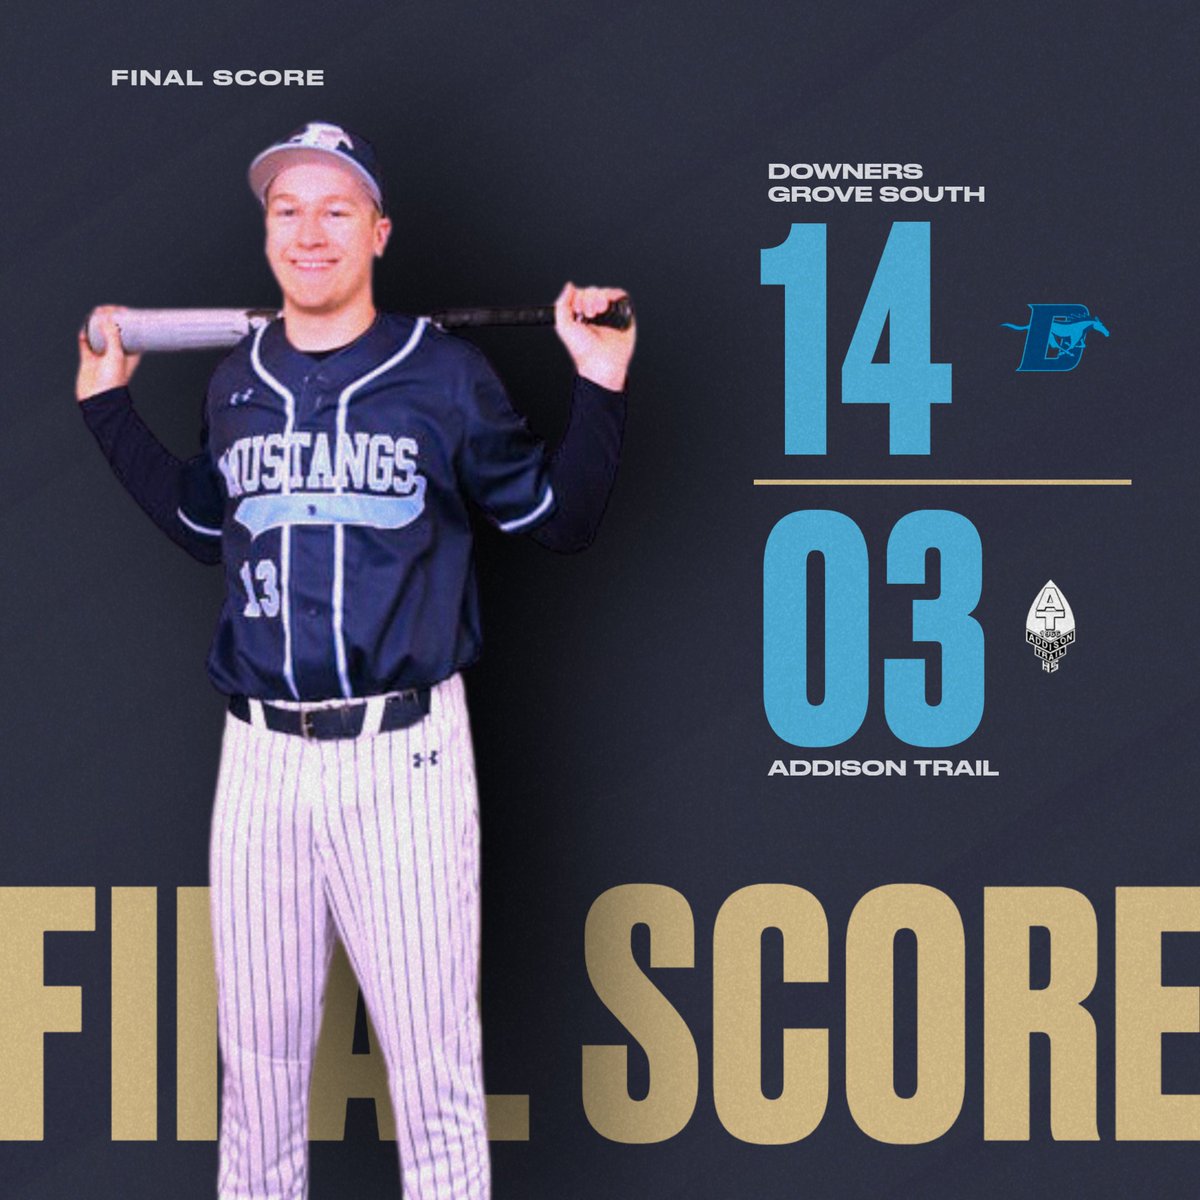 Congratulations to the Baseball team on completing the 3 game sweep against Addison Trail. @DgsBaseball #dgspride #southsidestrong